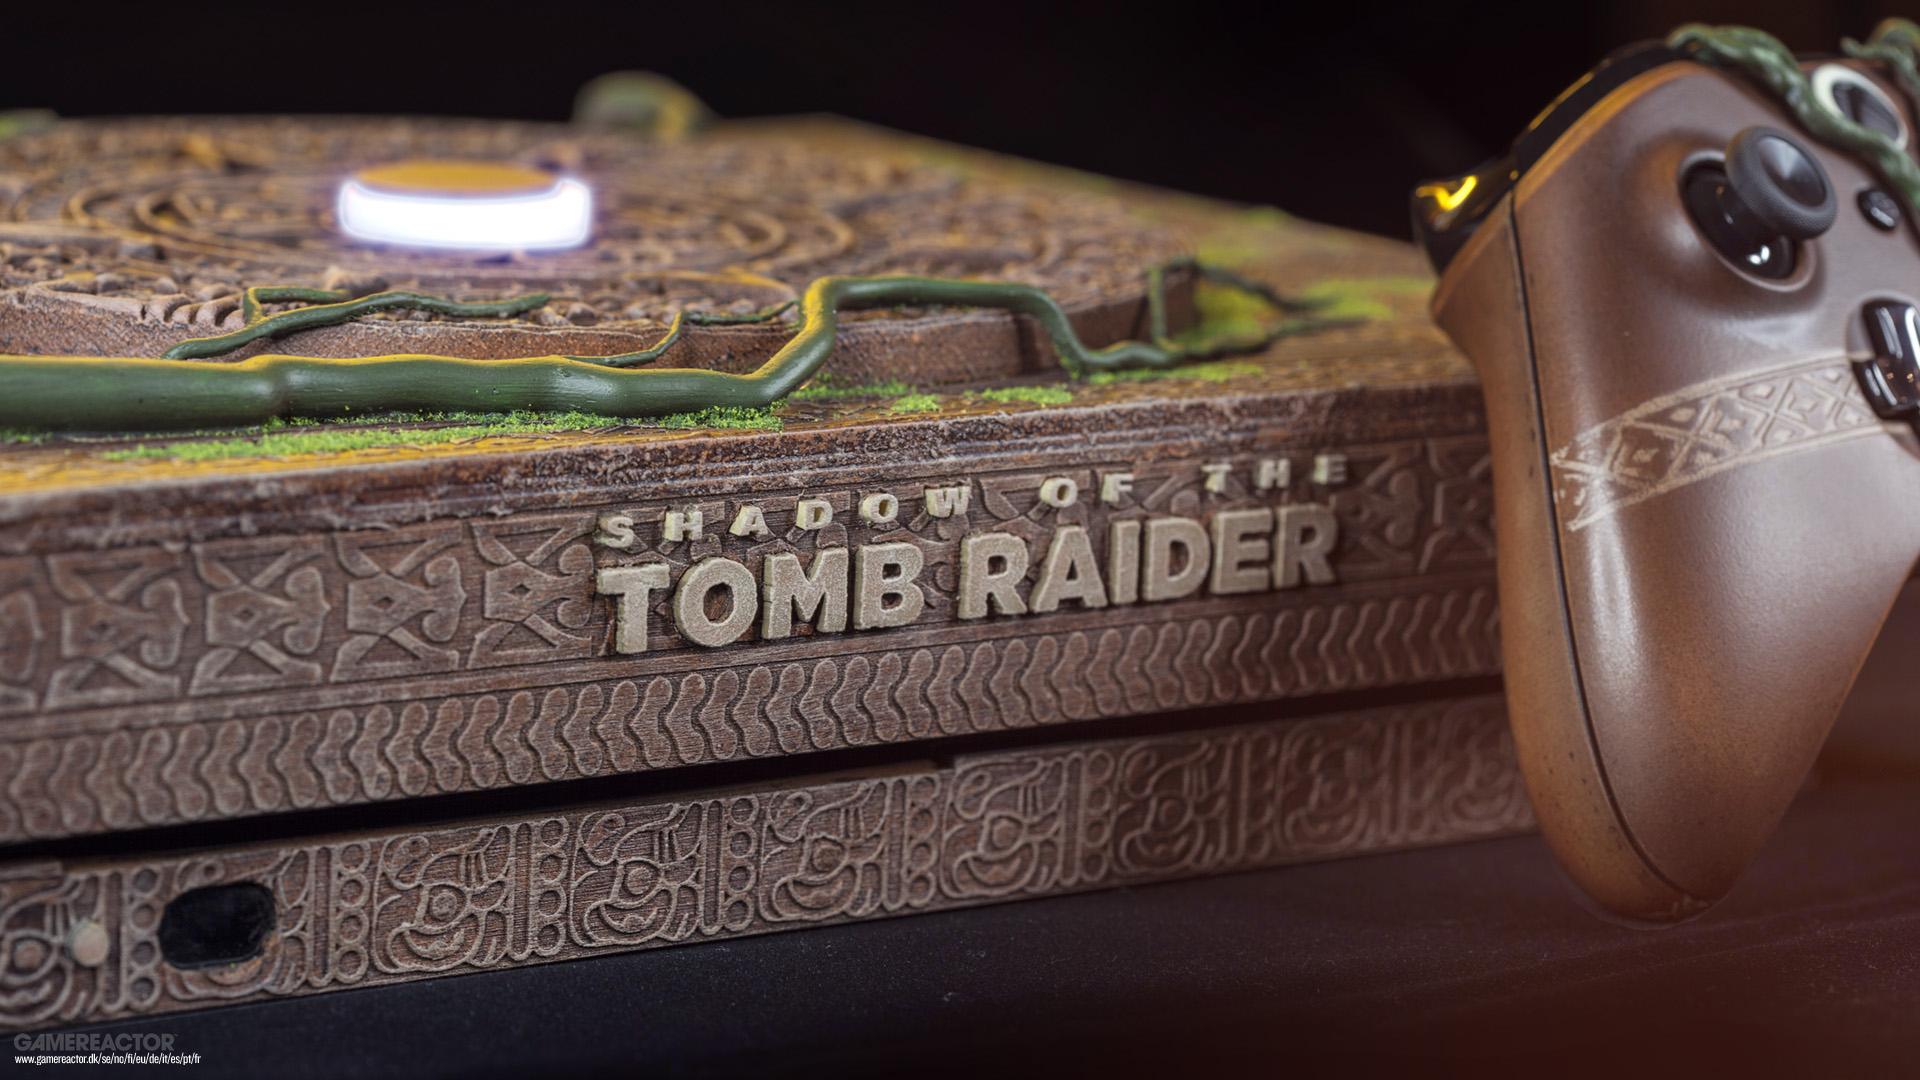 manager banner Snor Special Shadow of the Tomb Raider Xbox One X auctioned off